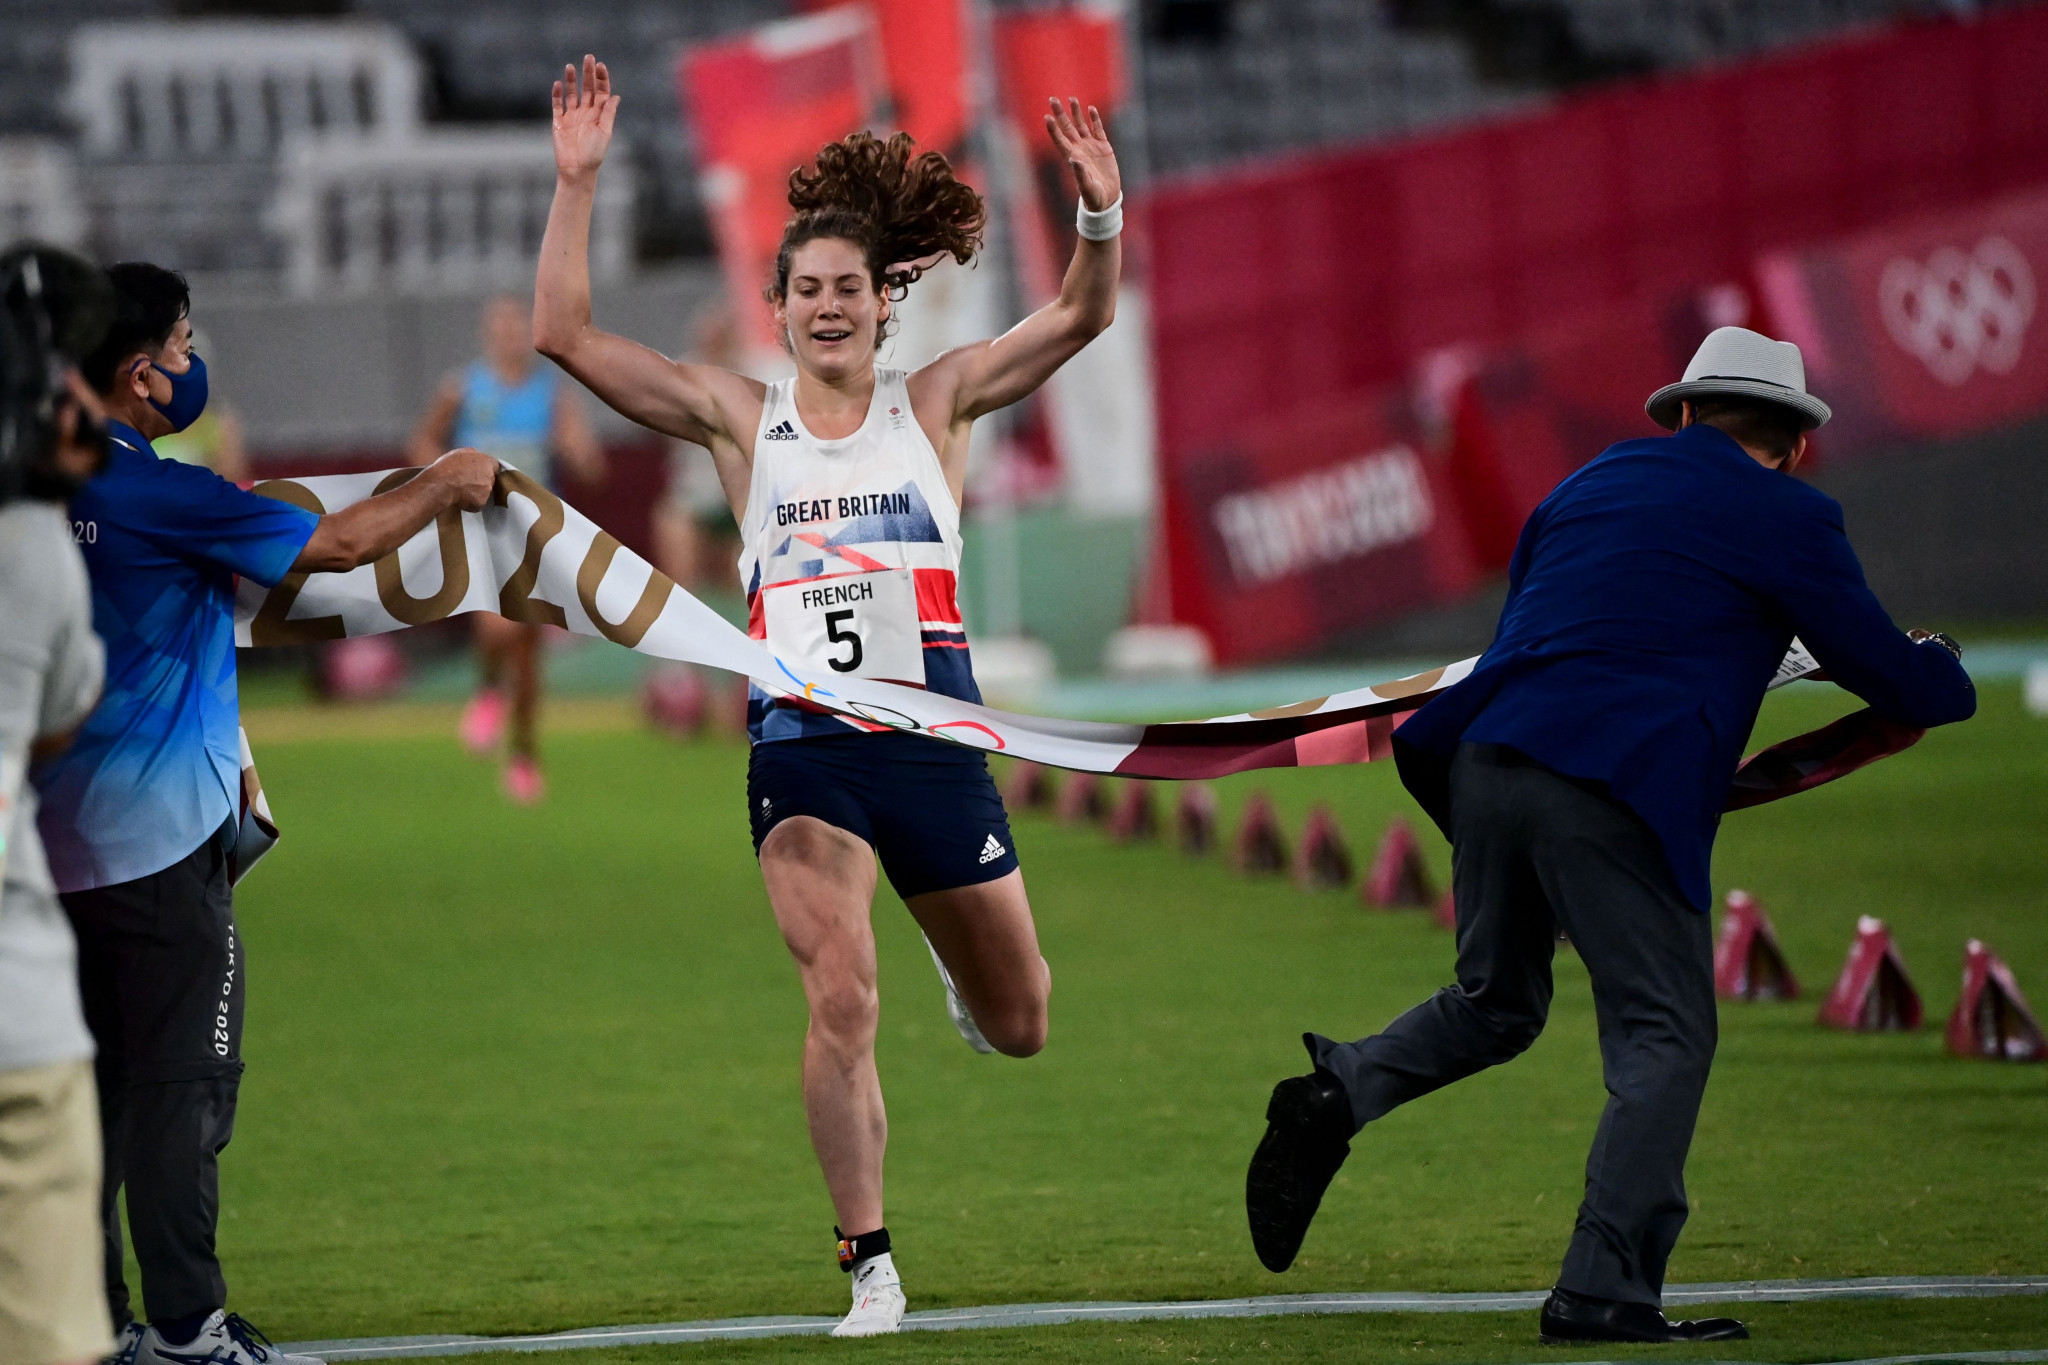 Kate French is aiming to defend her women's modern pentathlon title at Paris 2024 after her success at Tokyo 2020 ©Getty Images